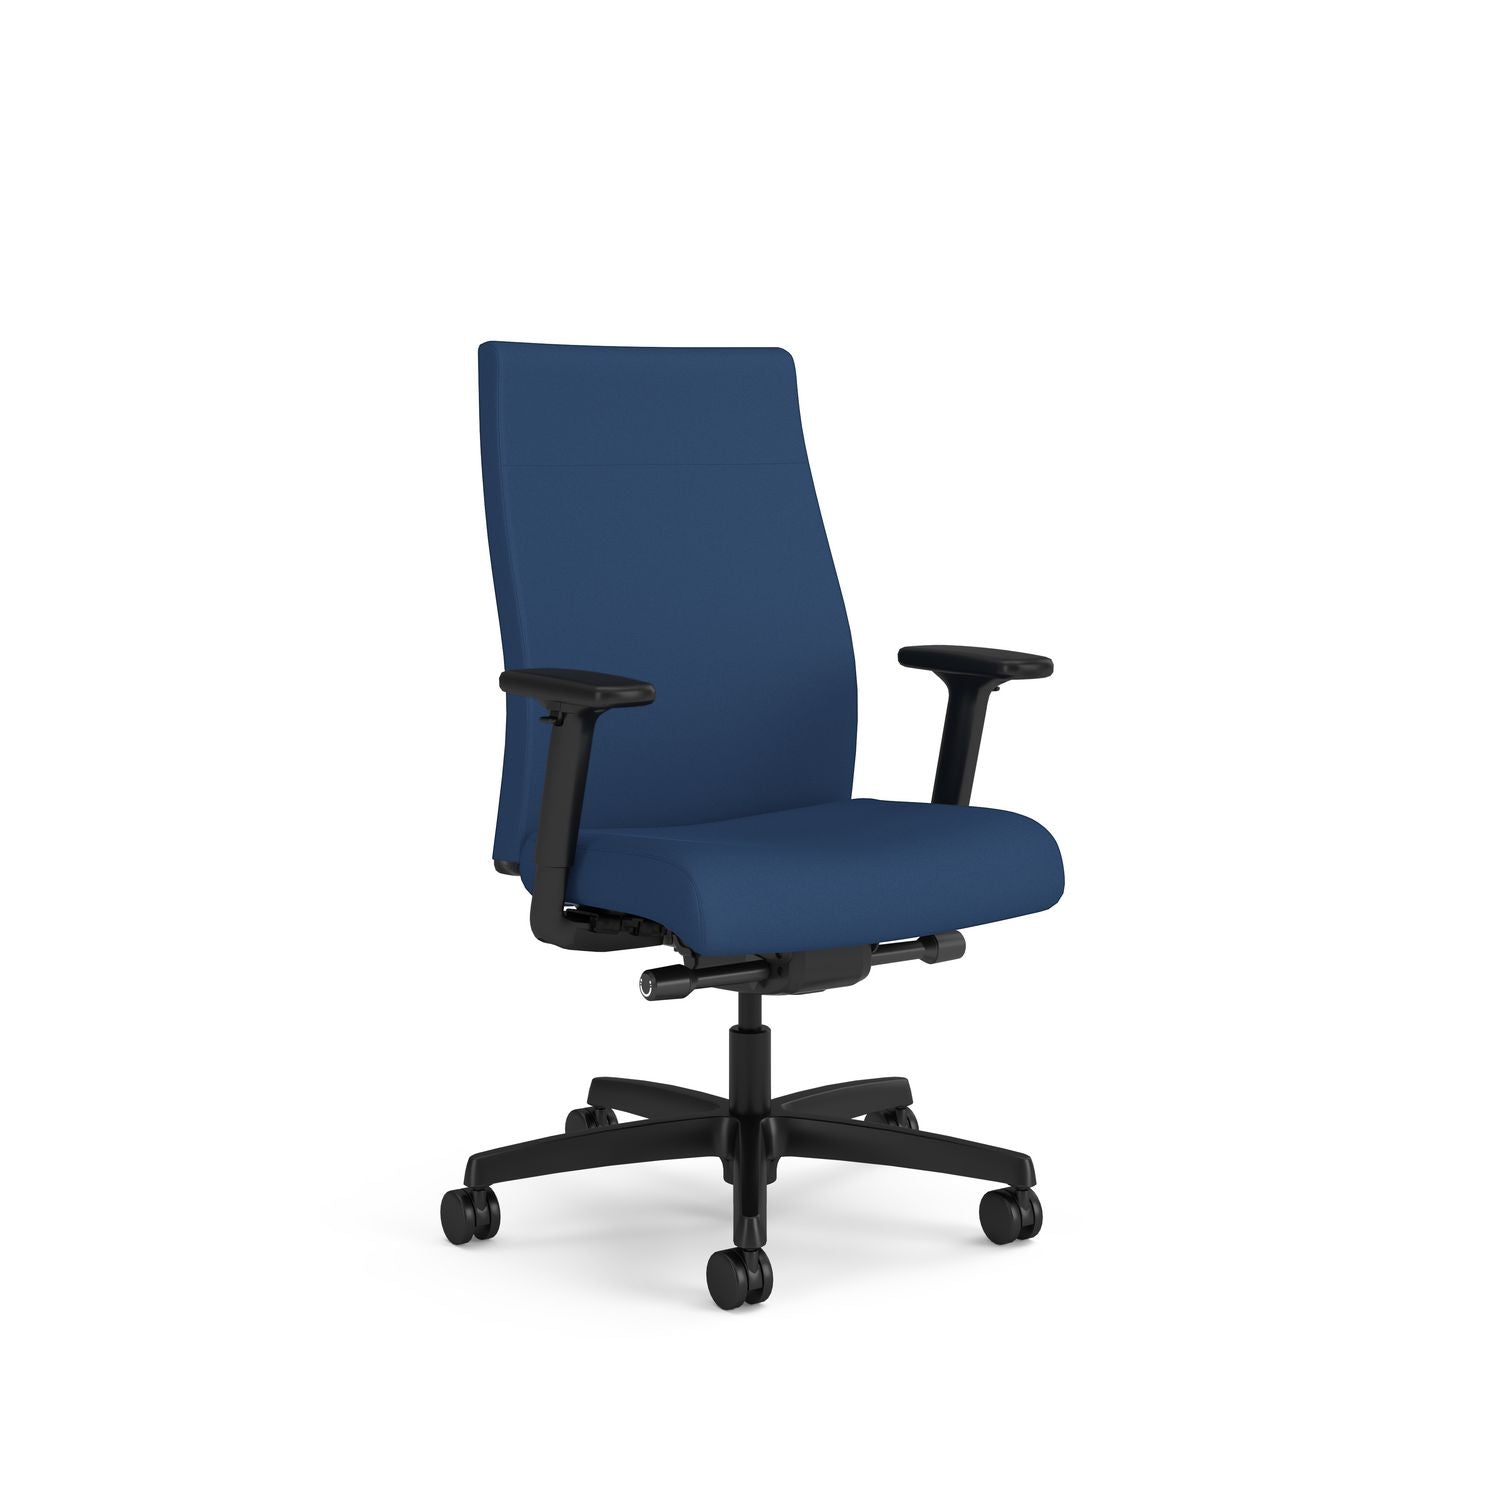 ignition-20-upholstered-mid-back-task-chair-up-to-300-lbs-17-to-215-seat-height-elysian-seat-and-back-black-base_honi2u2asx04ntk - 1